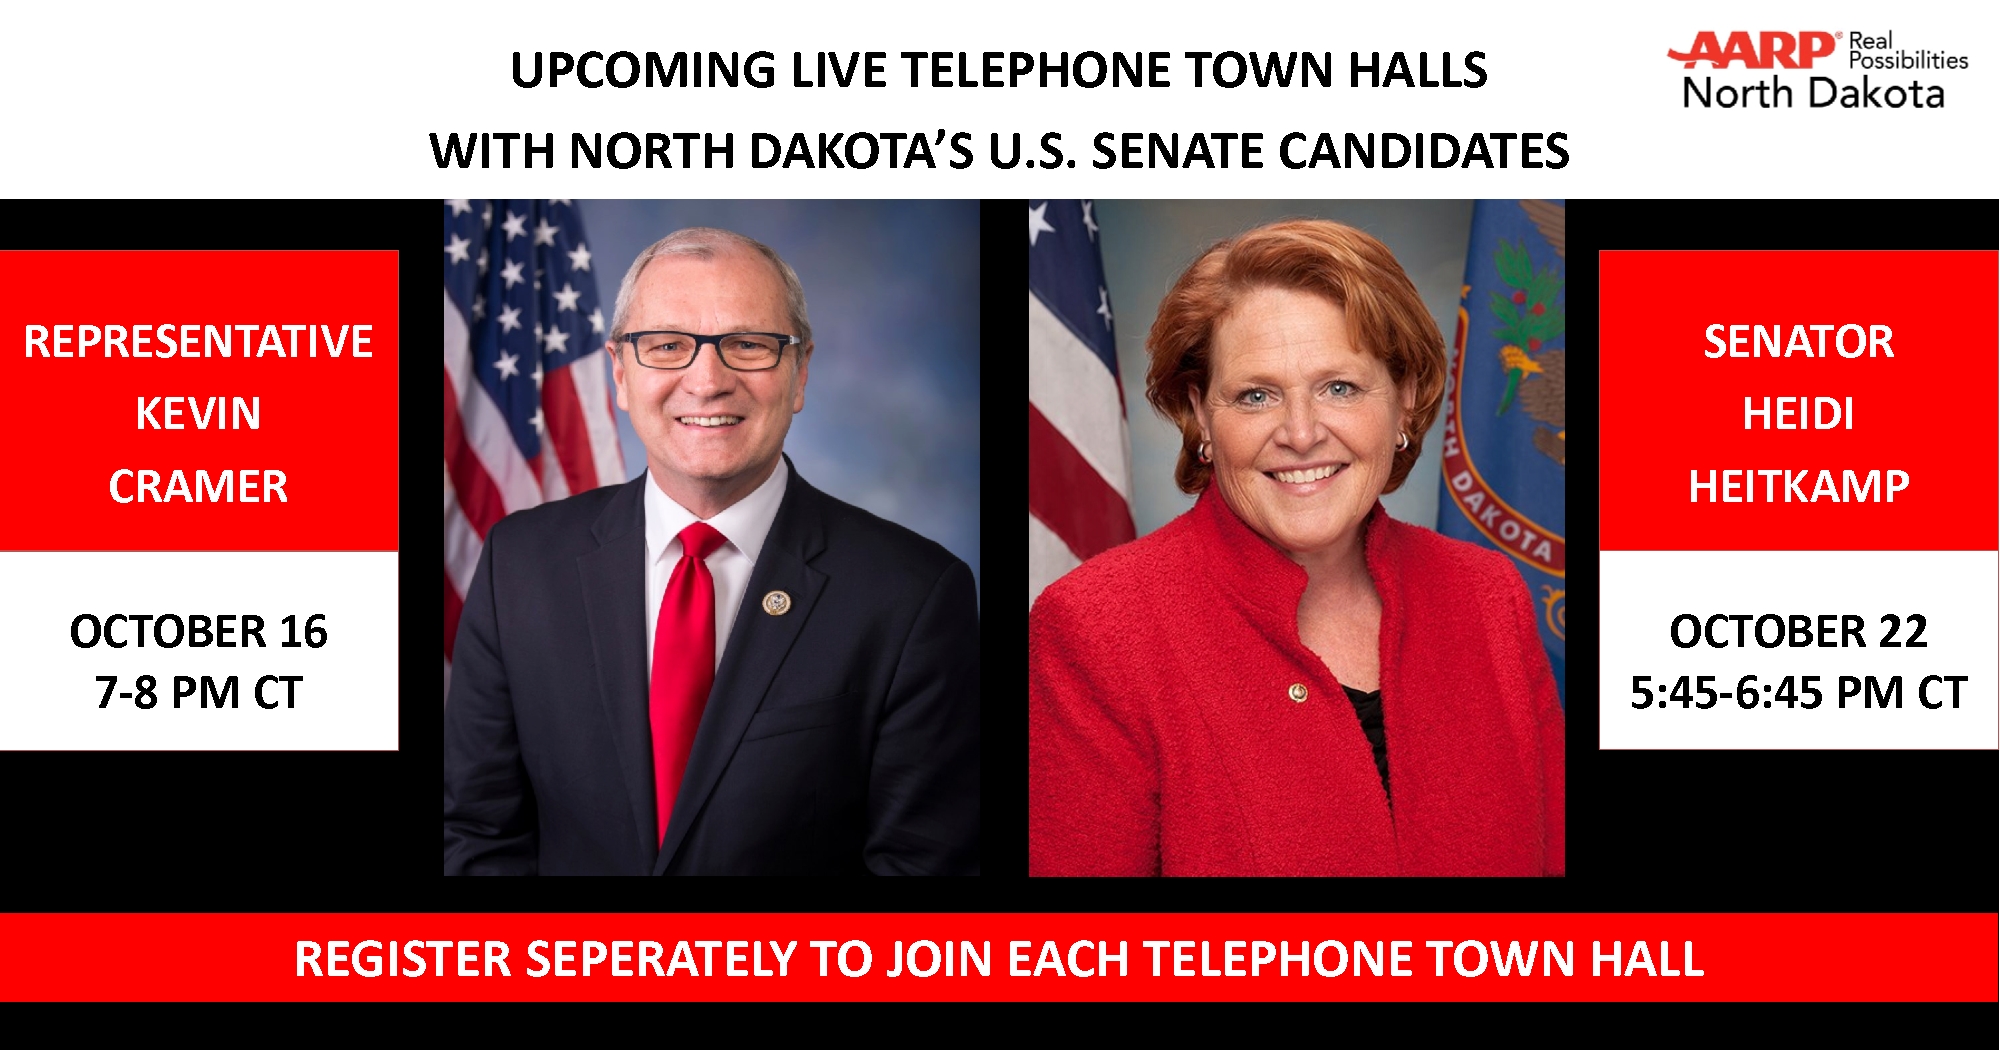 ND - Telephone Town Hall Graphic